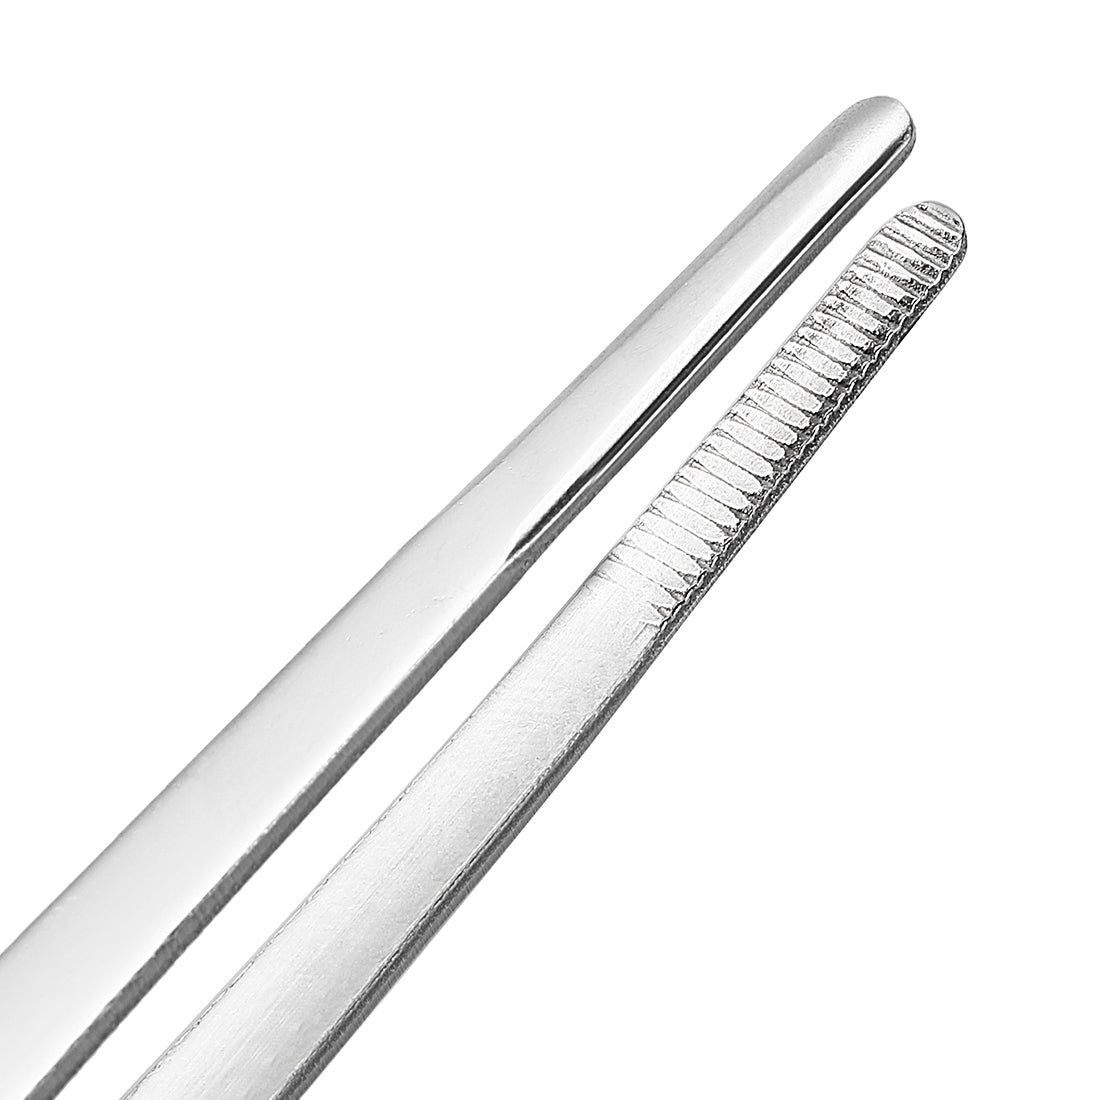 uxcell Uxcell 2 Pcs 12-Inch Stainless Steel Straight Blunt Tweezers with Serrated Tip